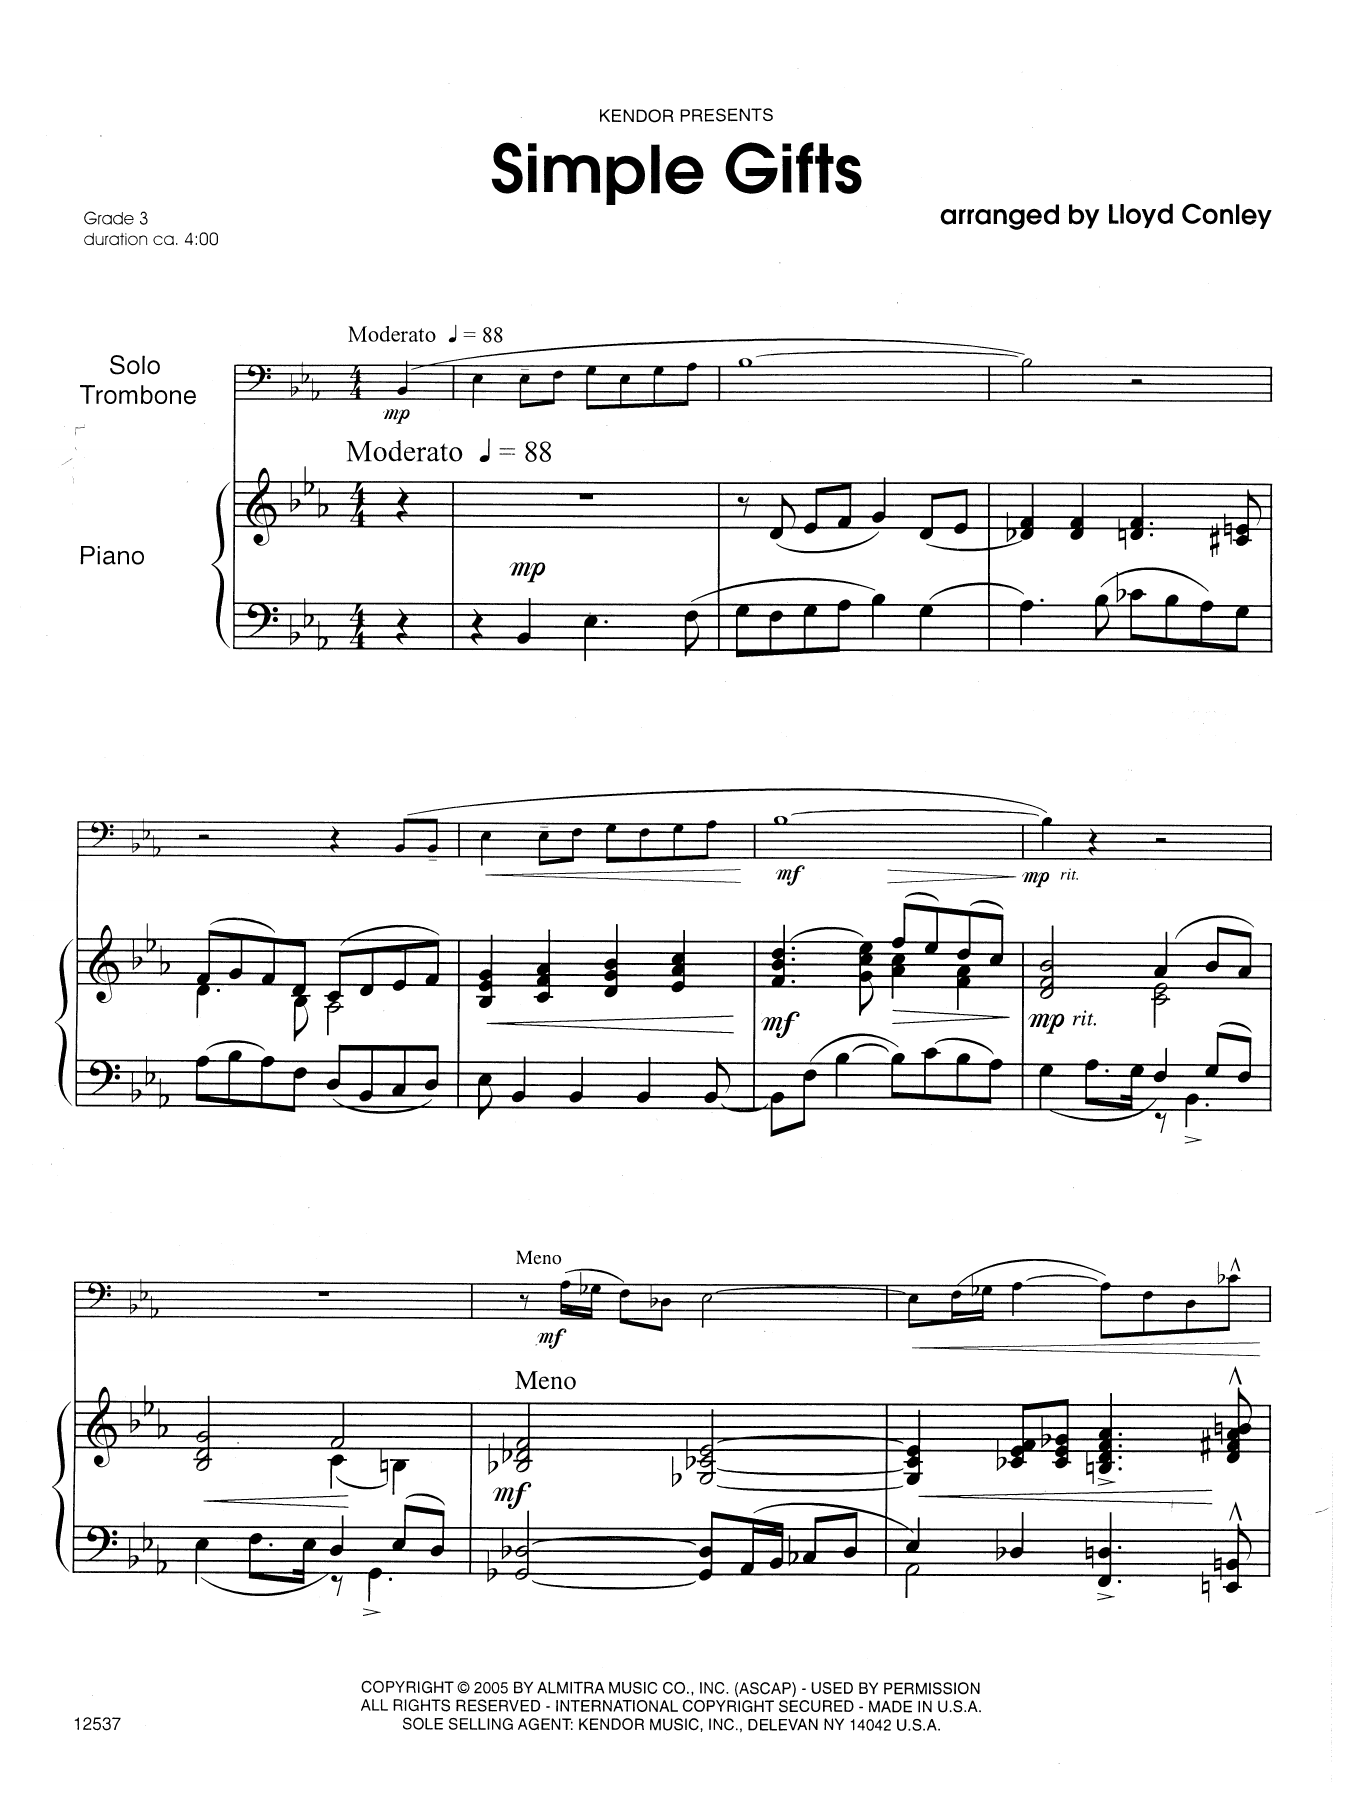 Download Lloyd Conley Simple Gifts - Piano Sheet Music